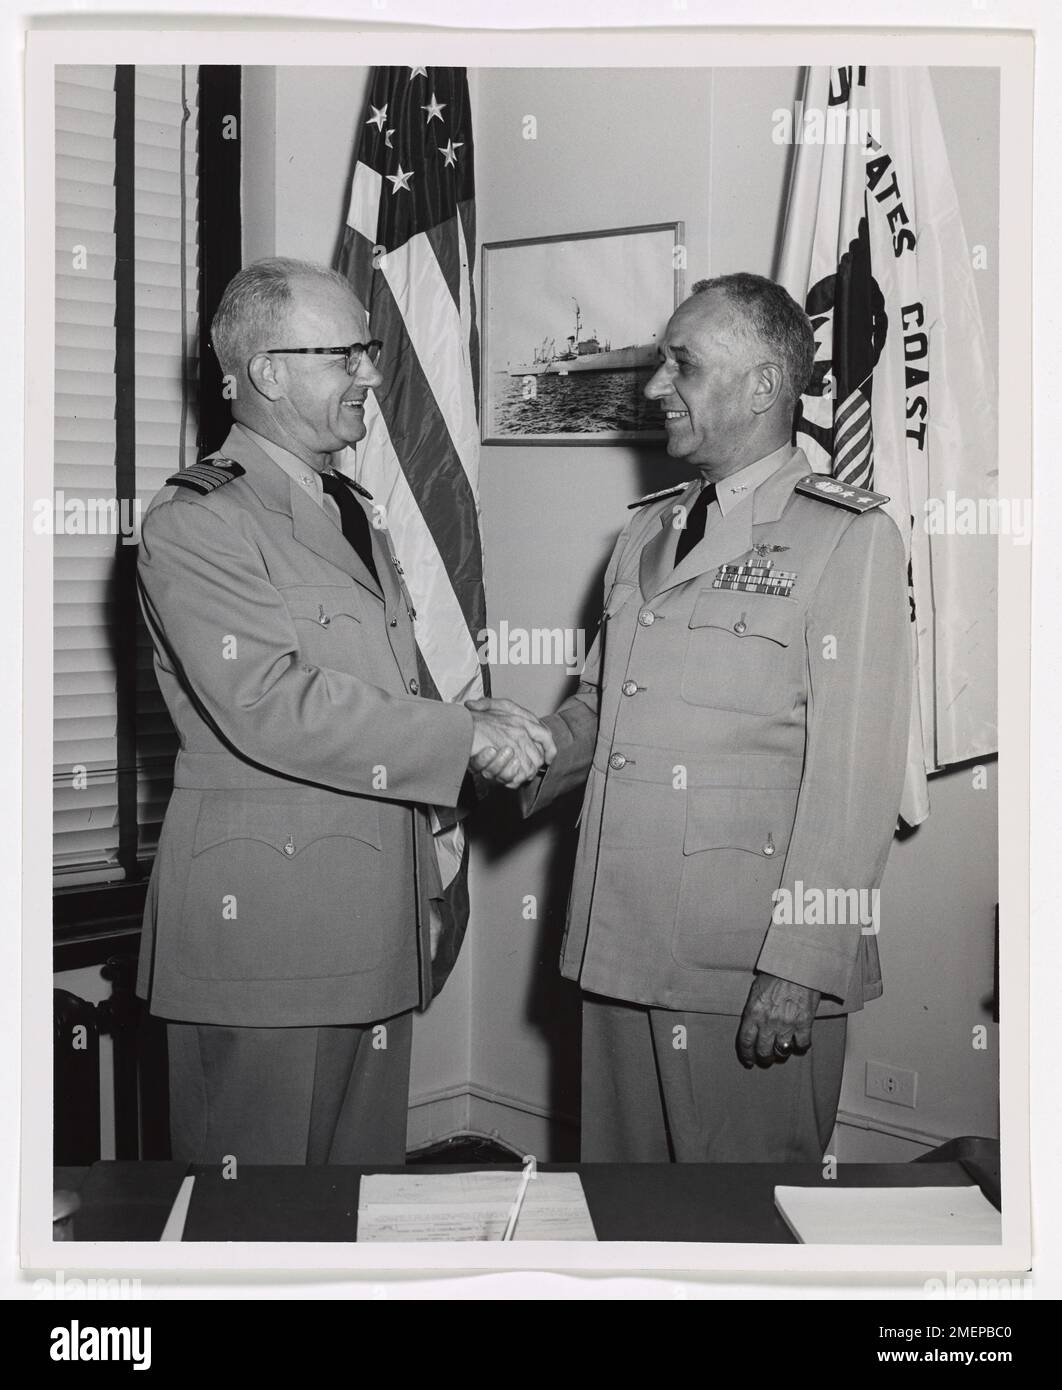 Rear Admiral Frank A. Leamy, USCG. Captain Harold C. Moore, Chief of Staff of the Ninth Coast Guard District congratulates Rear Admiral Frank A. Leamy, USCG, upon attaining his new two star rank of Rear Admiral. Rear Admiral Leamy assumed the command of the Ninth Coast Guard District on 1 September, 1954, relieving Rear Admiral Roy L. Raney who is now Commander, First Coast Guard District, Boston, Mass. Prior to taking over the Command of the Ninth District, Admiral Leamy was Commanding Officer of the Eighth Coast Guard District, New Orleans, La. Stock Photo